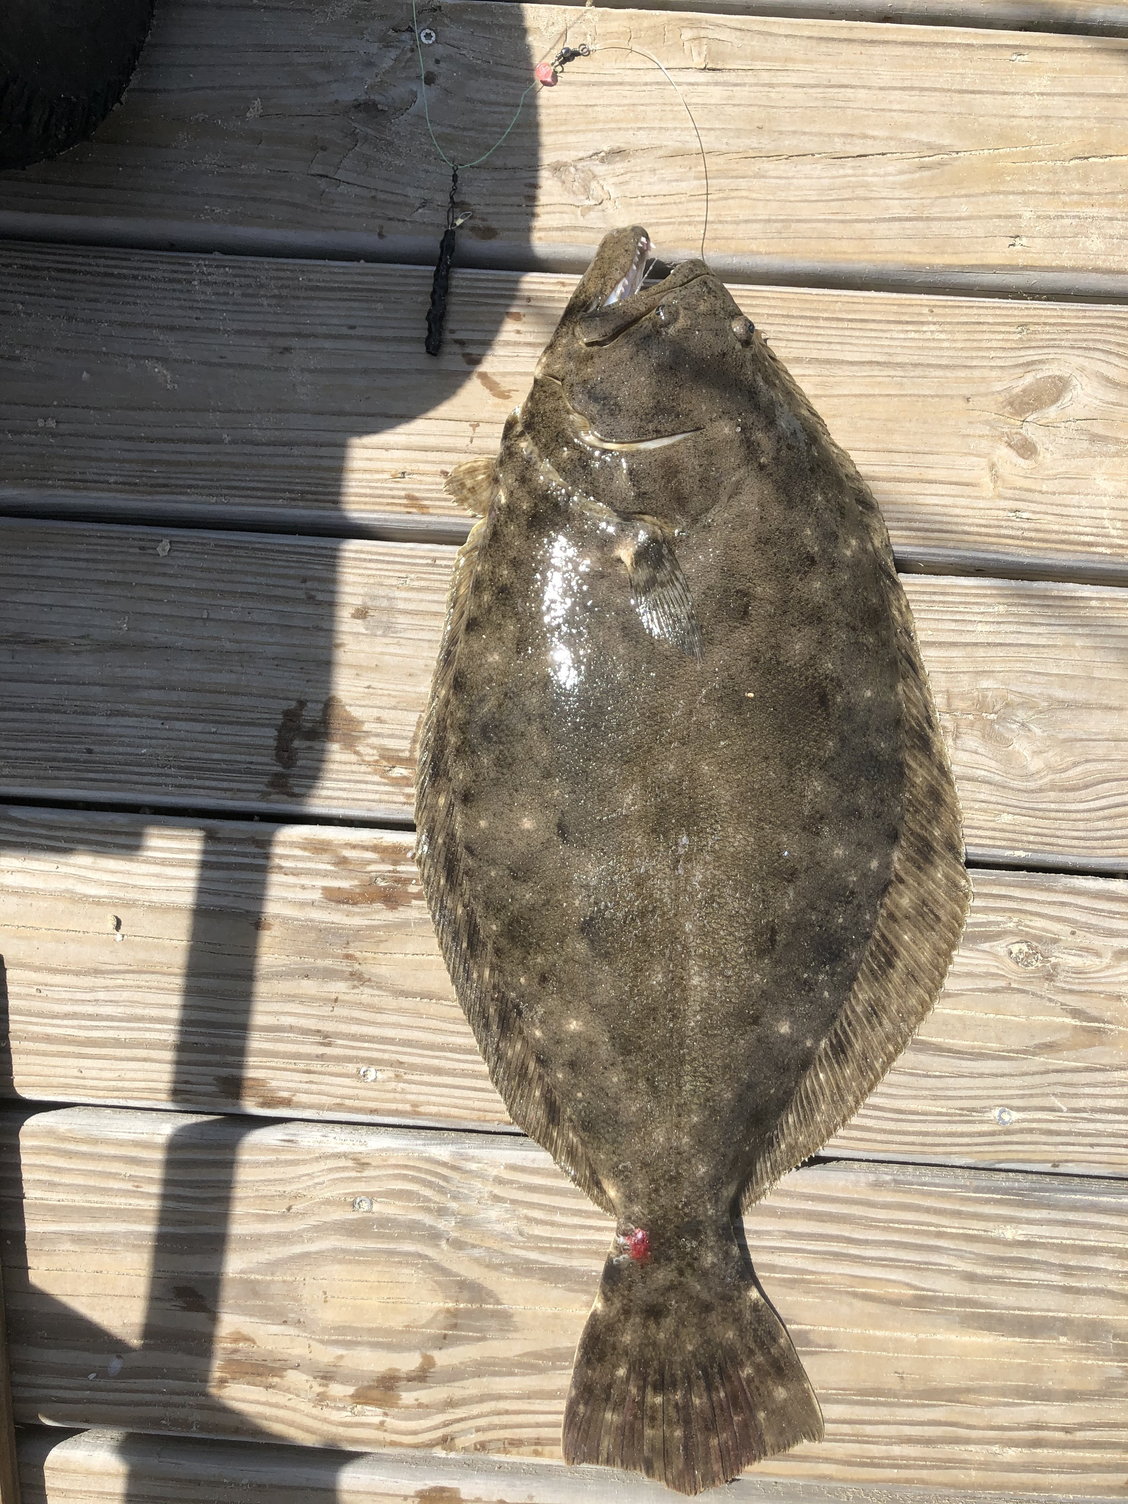 Flounder, summer and southern - The Hull Truth - Boating and Fishing Forum